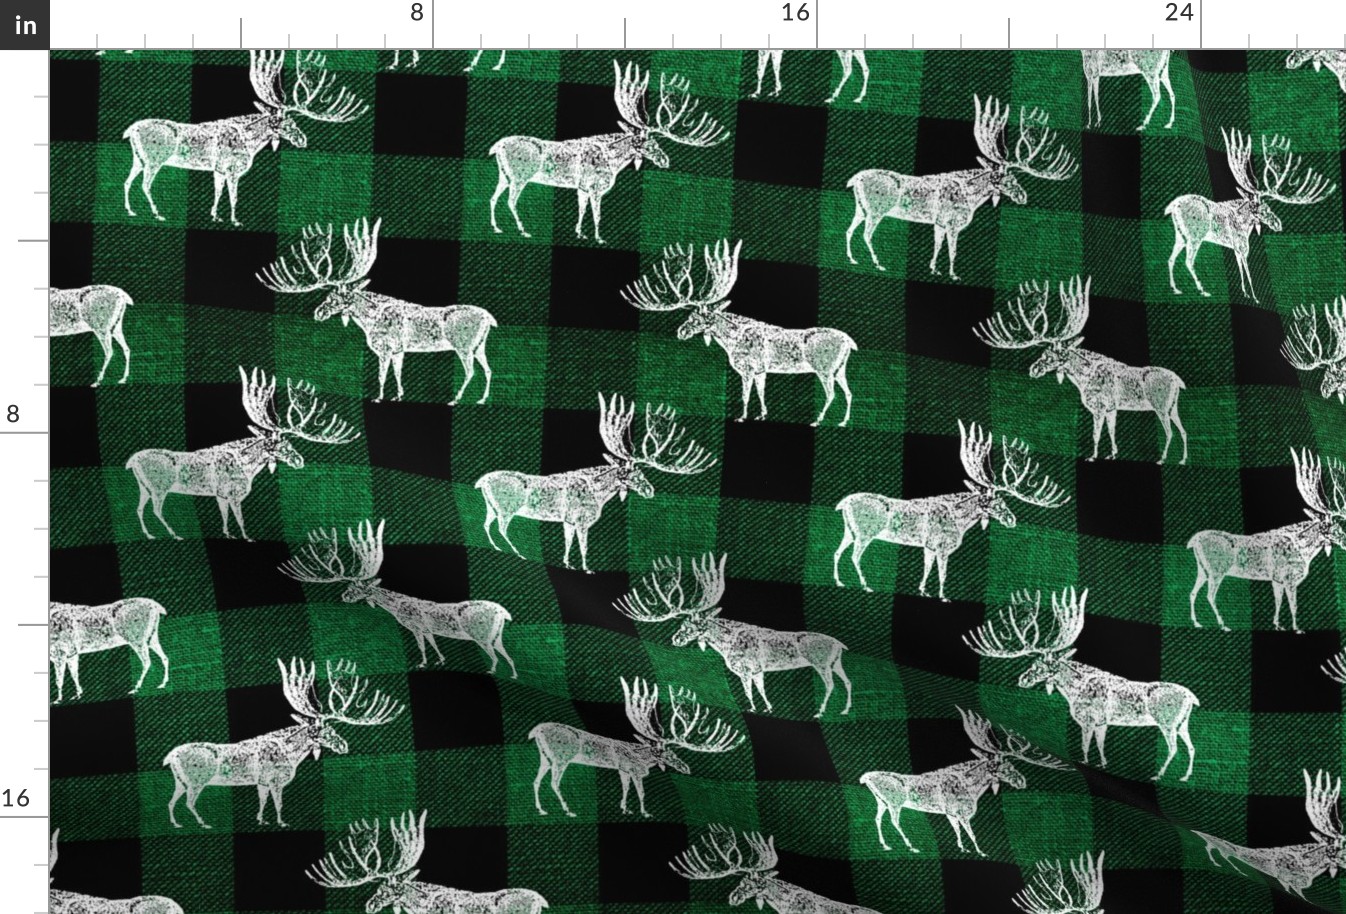 Moose in White on a Green Buffalo Plaid textured Background